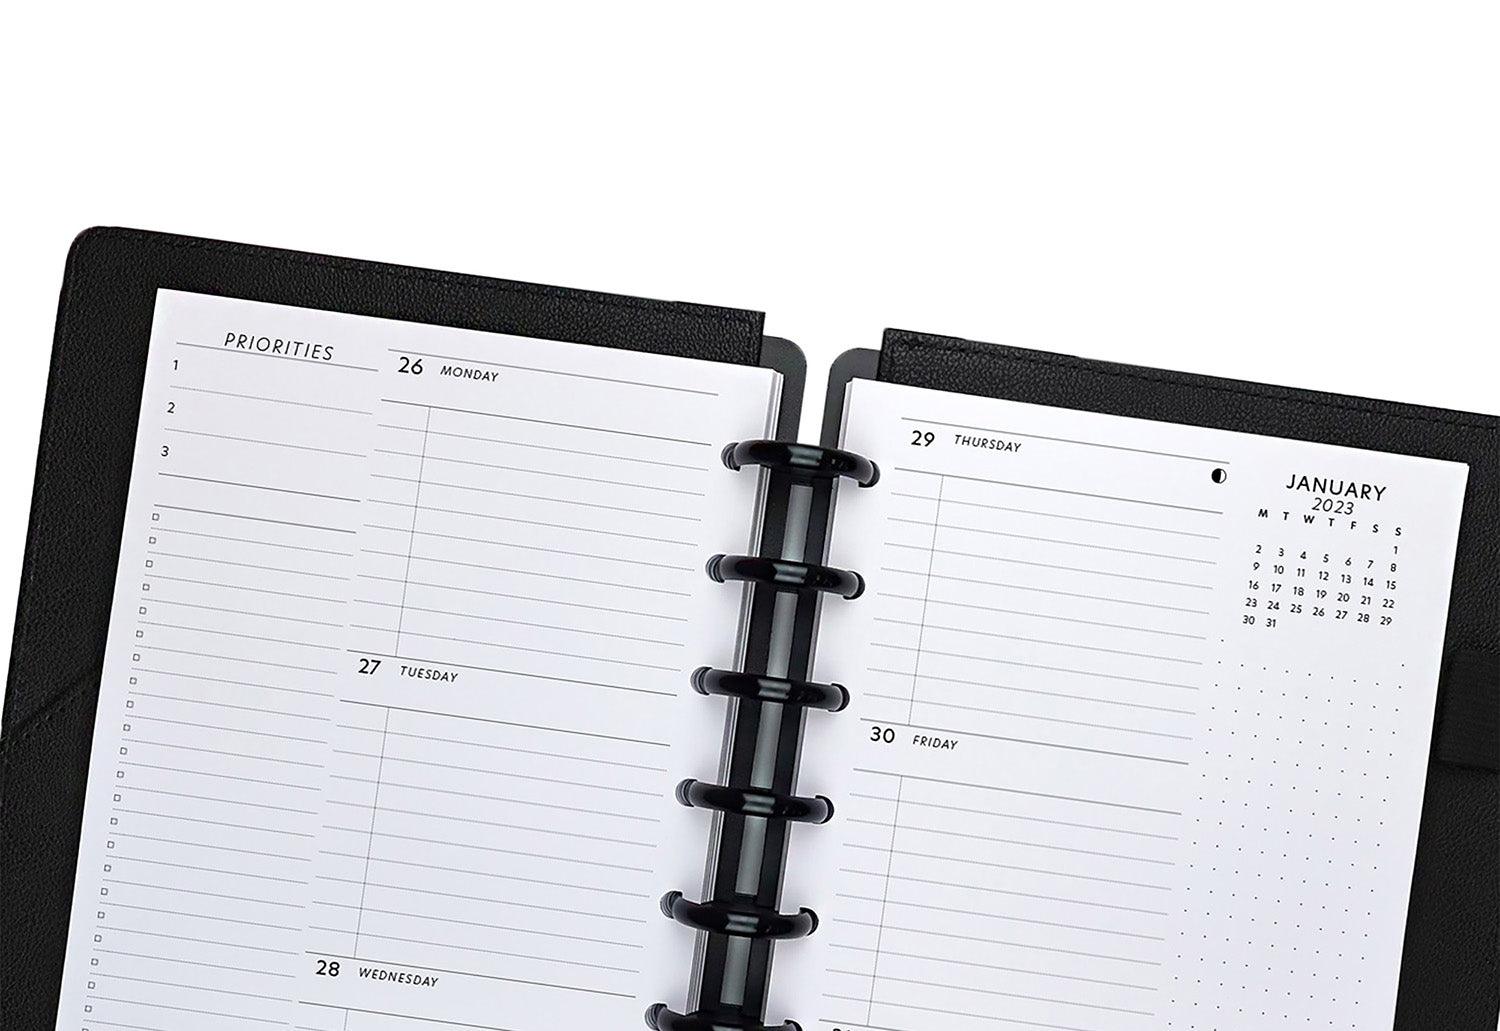 Weekly planner inserts and calendar pages for discbound planners and six ring or ringbound planners and notebooks by Janes Agenda.